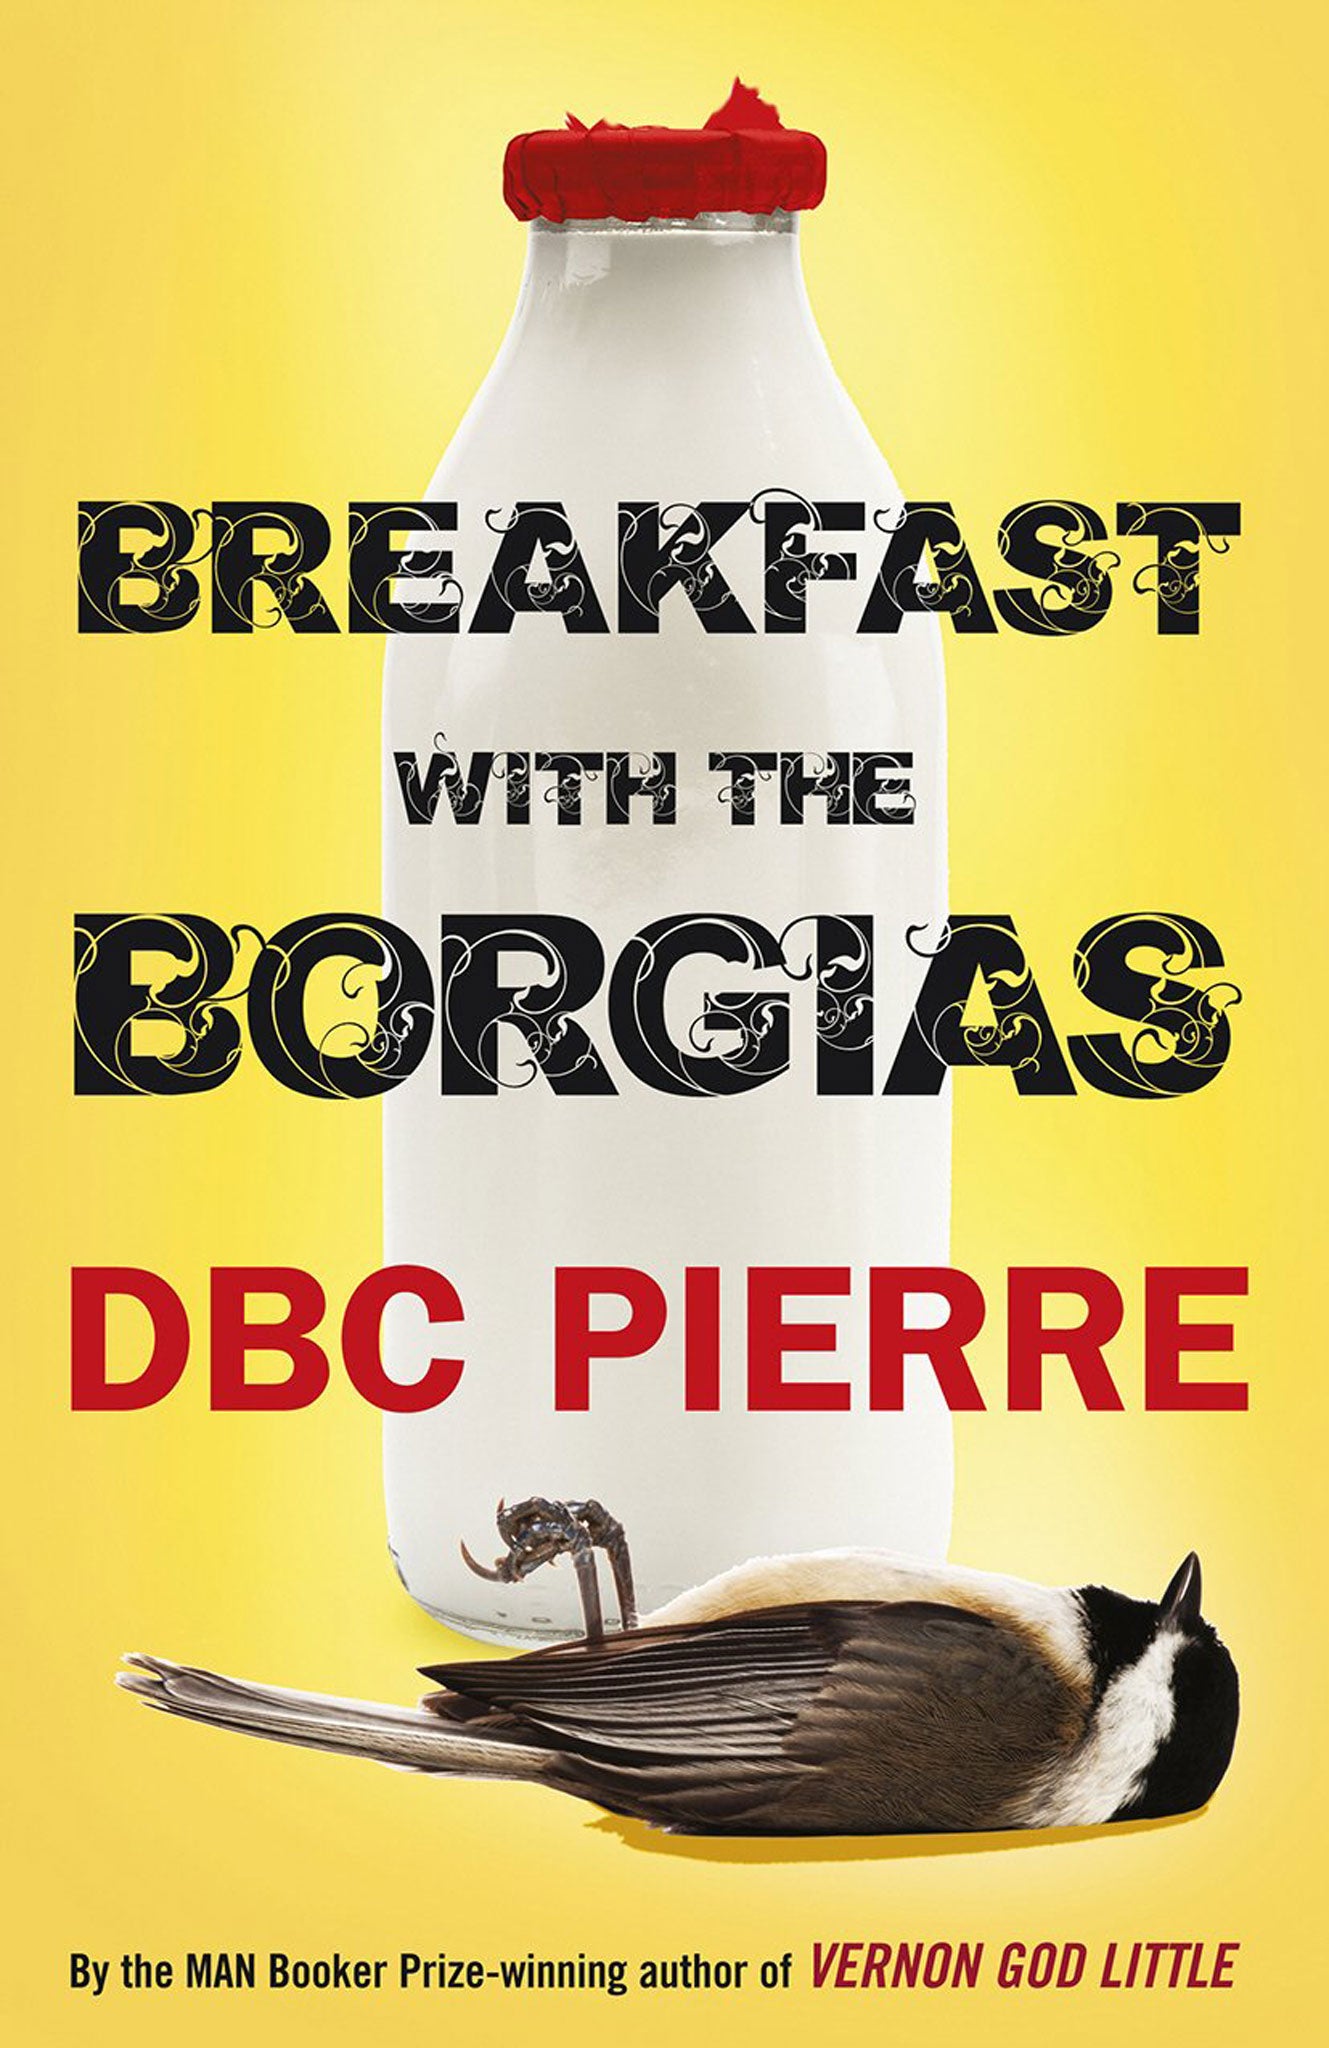 Booker prize-winner, DBC Pierre's latest, 'Breakfast with the Borgias', is out in paperback now